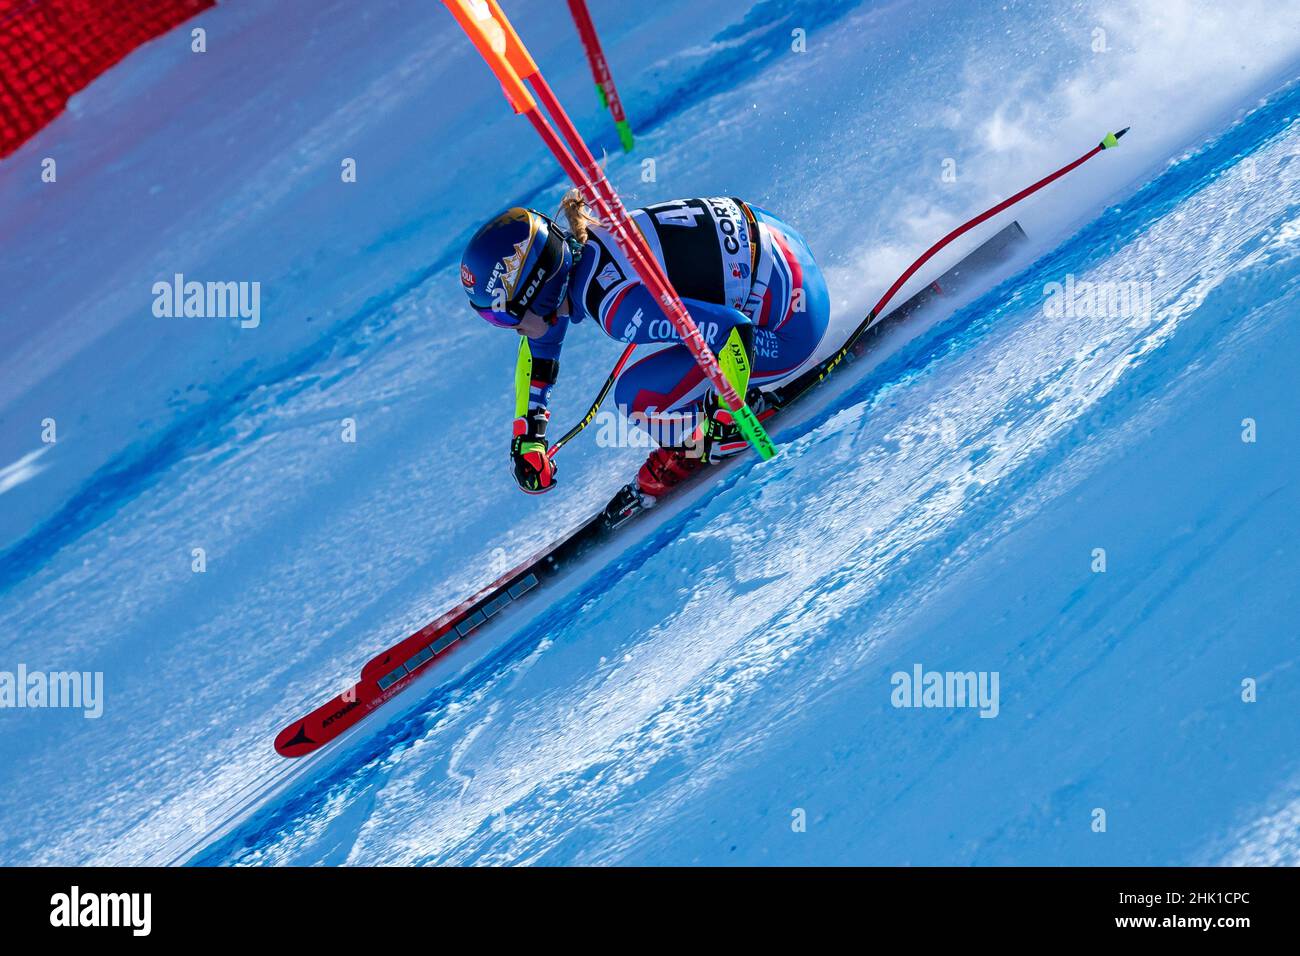 Cortina d'Ampezzo, Italy. 23 January 2022. CERUTTI Camille (FRA) competing in the Fis Alpine Ski World Cup Women's Super-G on the Olympia delle Tofane Stock Photo